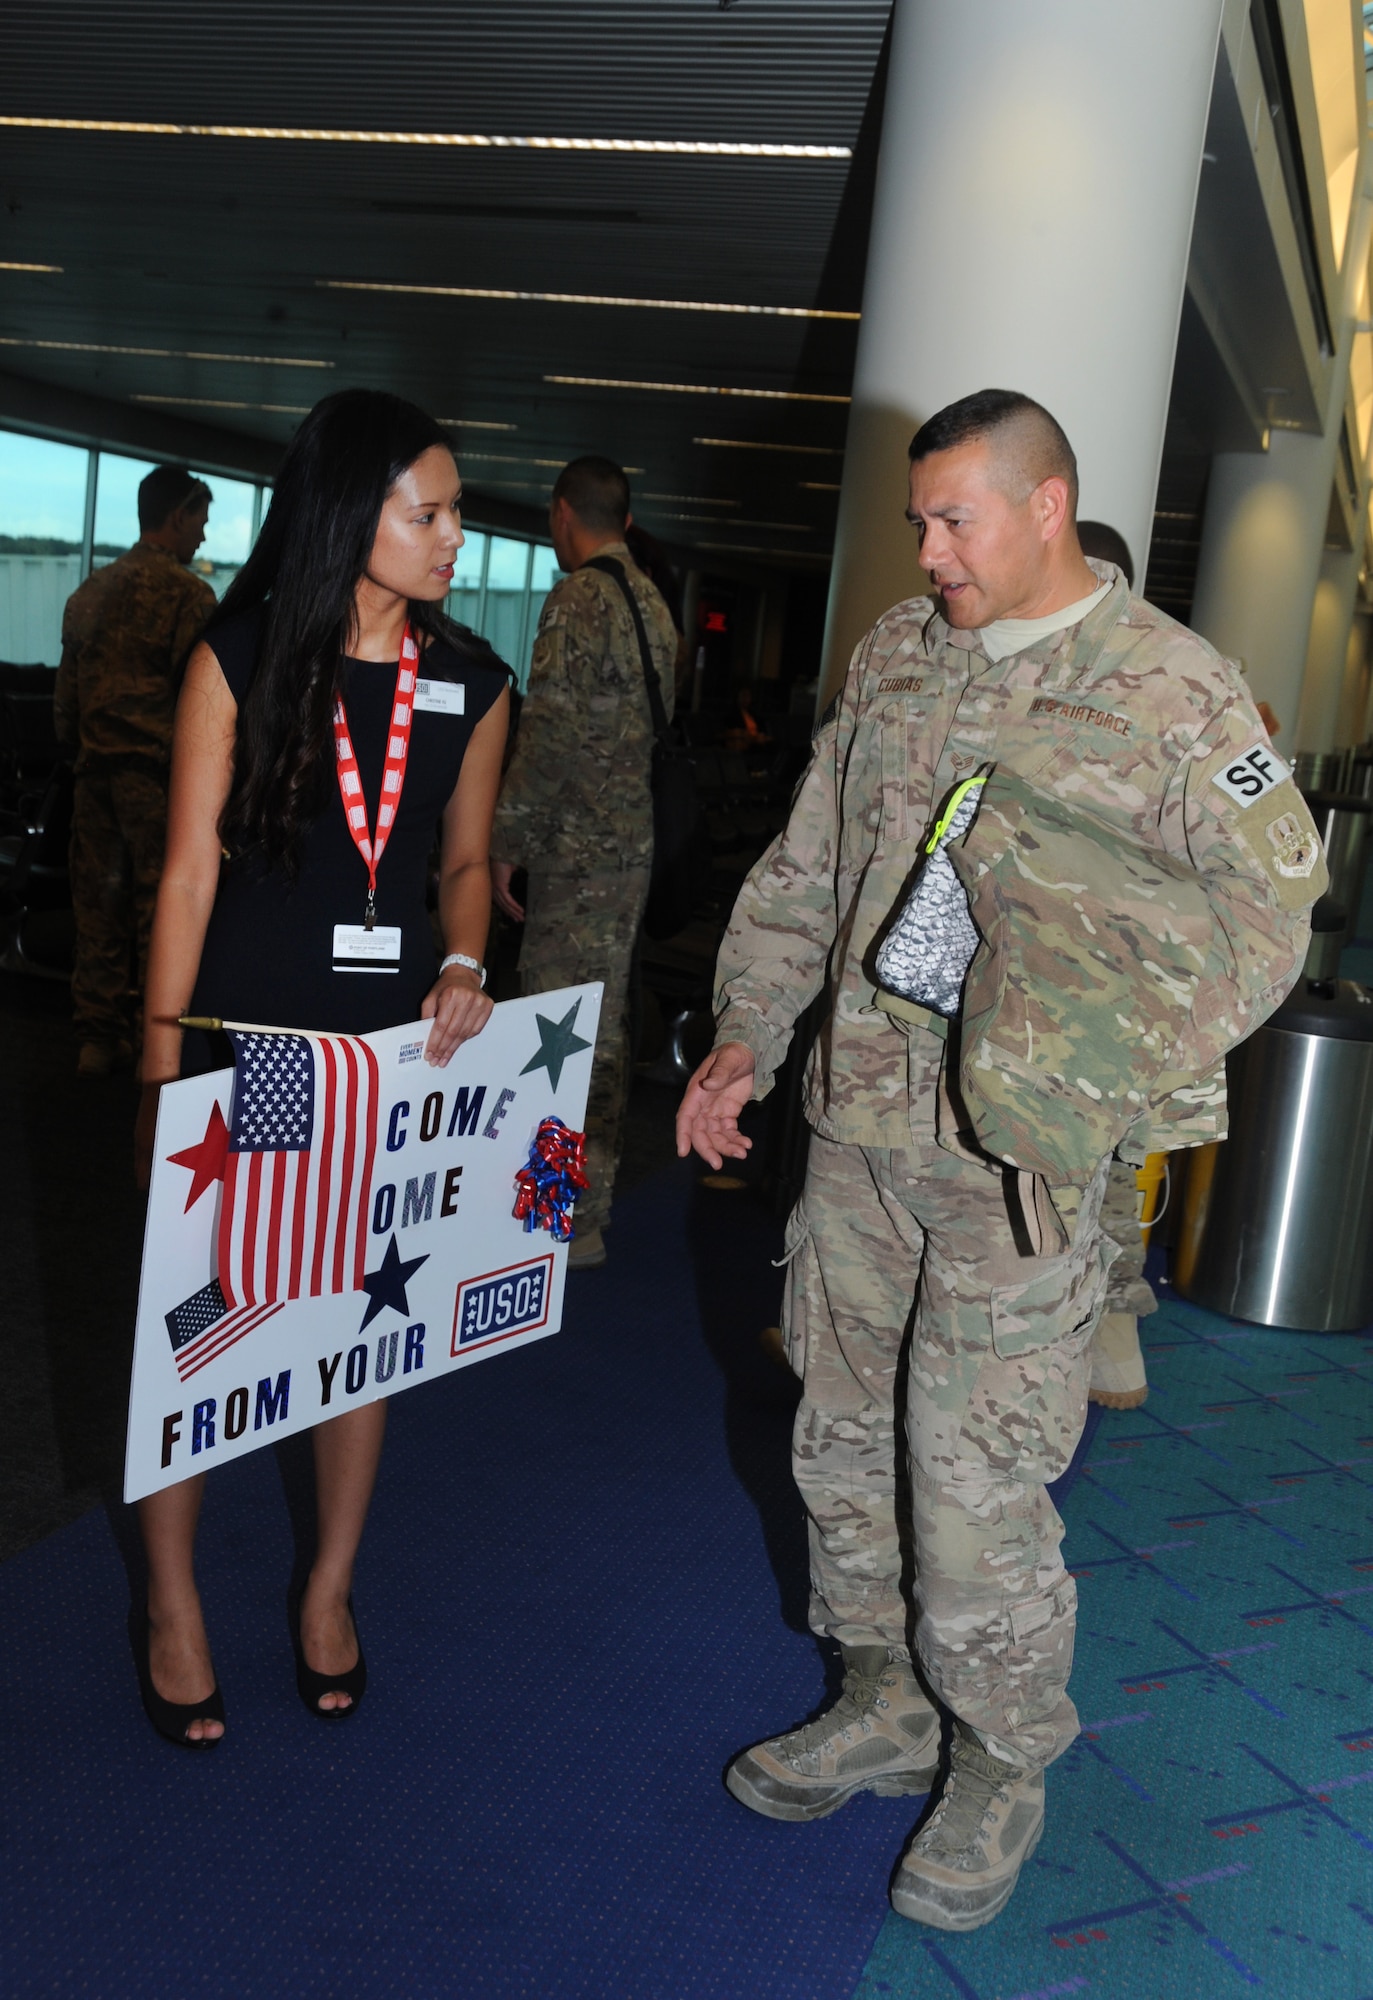 Christine Vu from the Portland USO talks with Staff Sgt. Joseph Cubias from the 142nd Security Forces Squadron after he and five other Airmen returned from their OEF deployment to Portland, Ore., Oct. 31, 2014.  (U.S. Air National Guard photo by Tech. Sgt. John Hughel, 142nd Fighter Wing Public Affairs/Released)